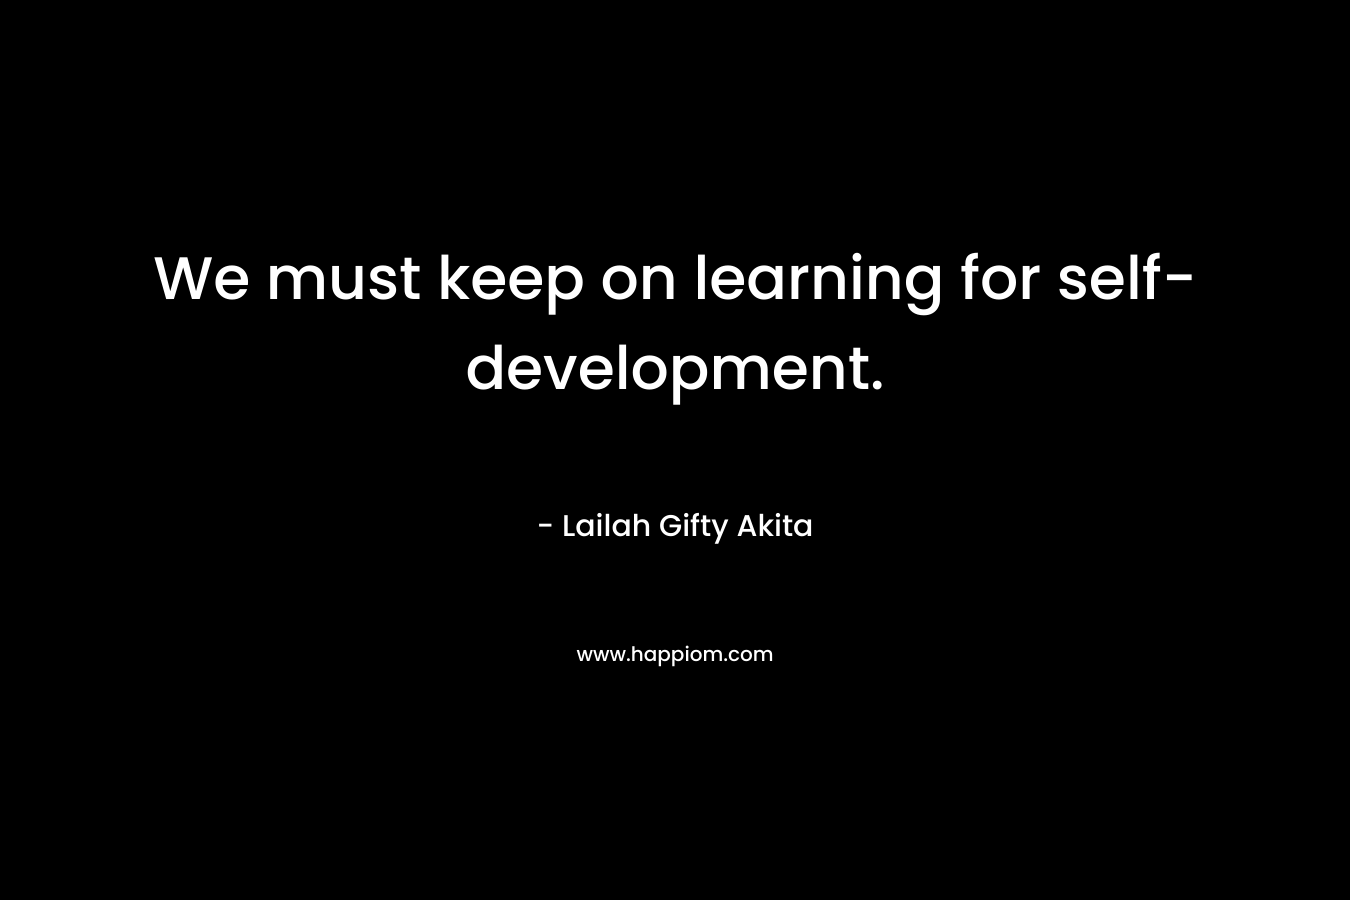 We must keep on learning for self-development. – Lailah Gifty Akita